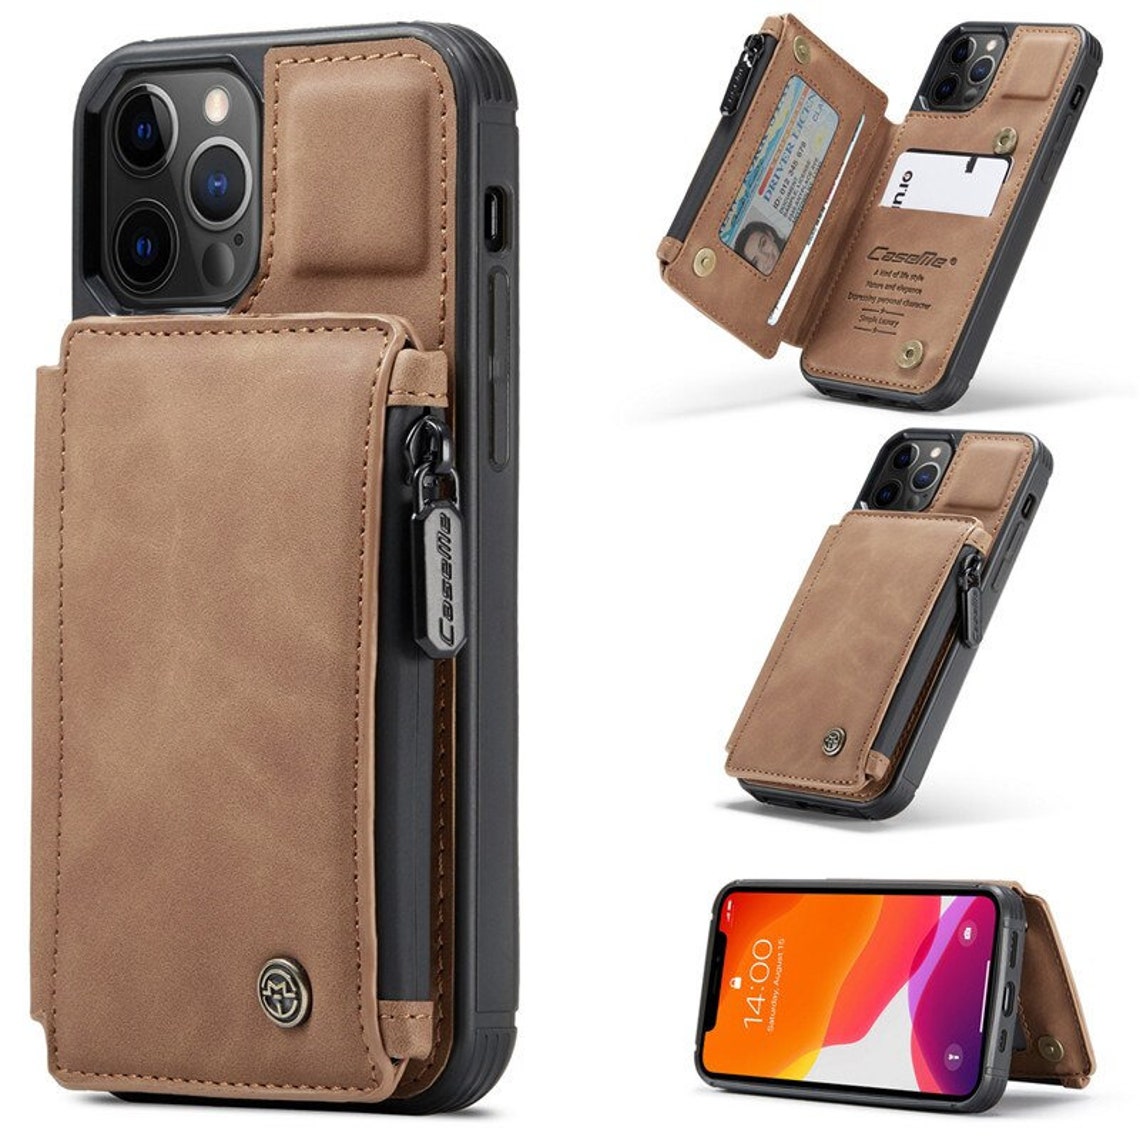 Flip Leather Case for Iphone 13 12 11 Pro XS Max XR X 7 8 Plus - Etsy